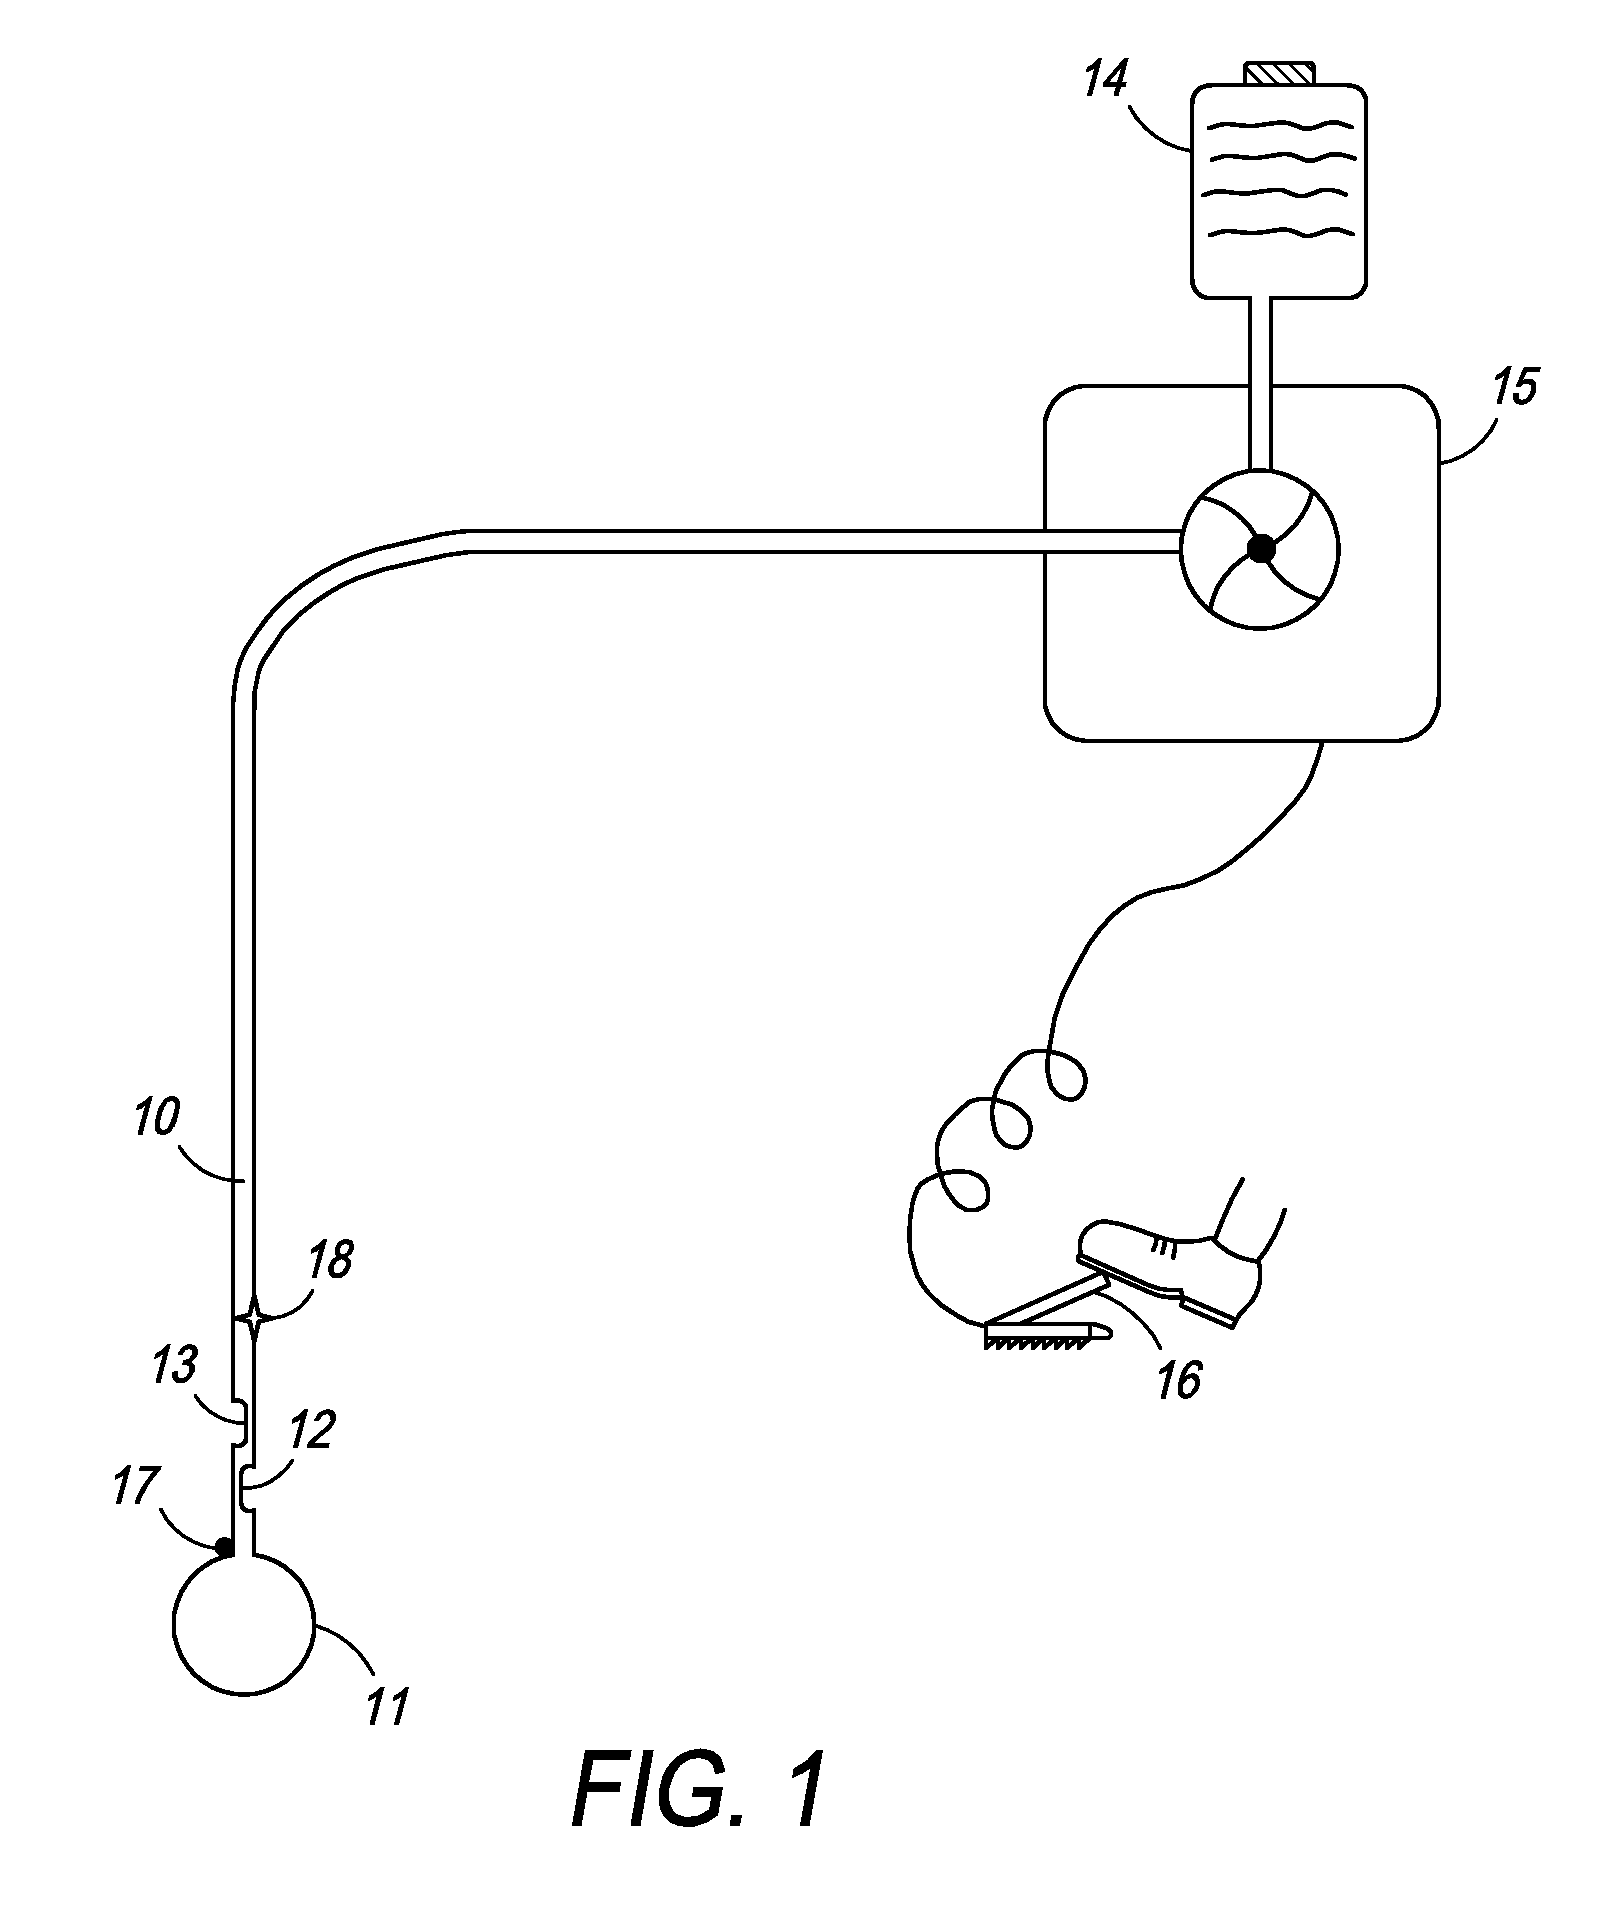 Method and Apparatus for the Ablation of Endometrial Tissue